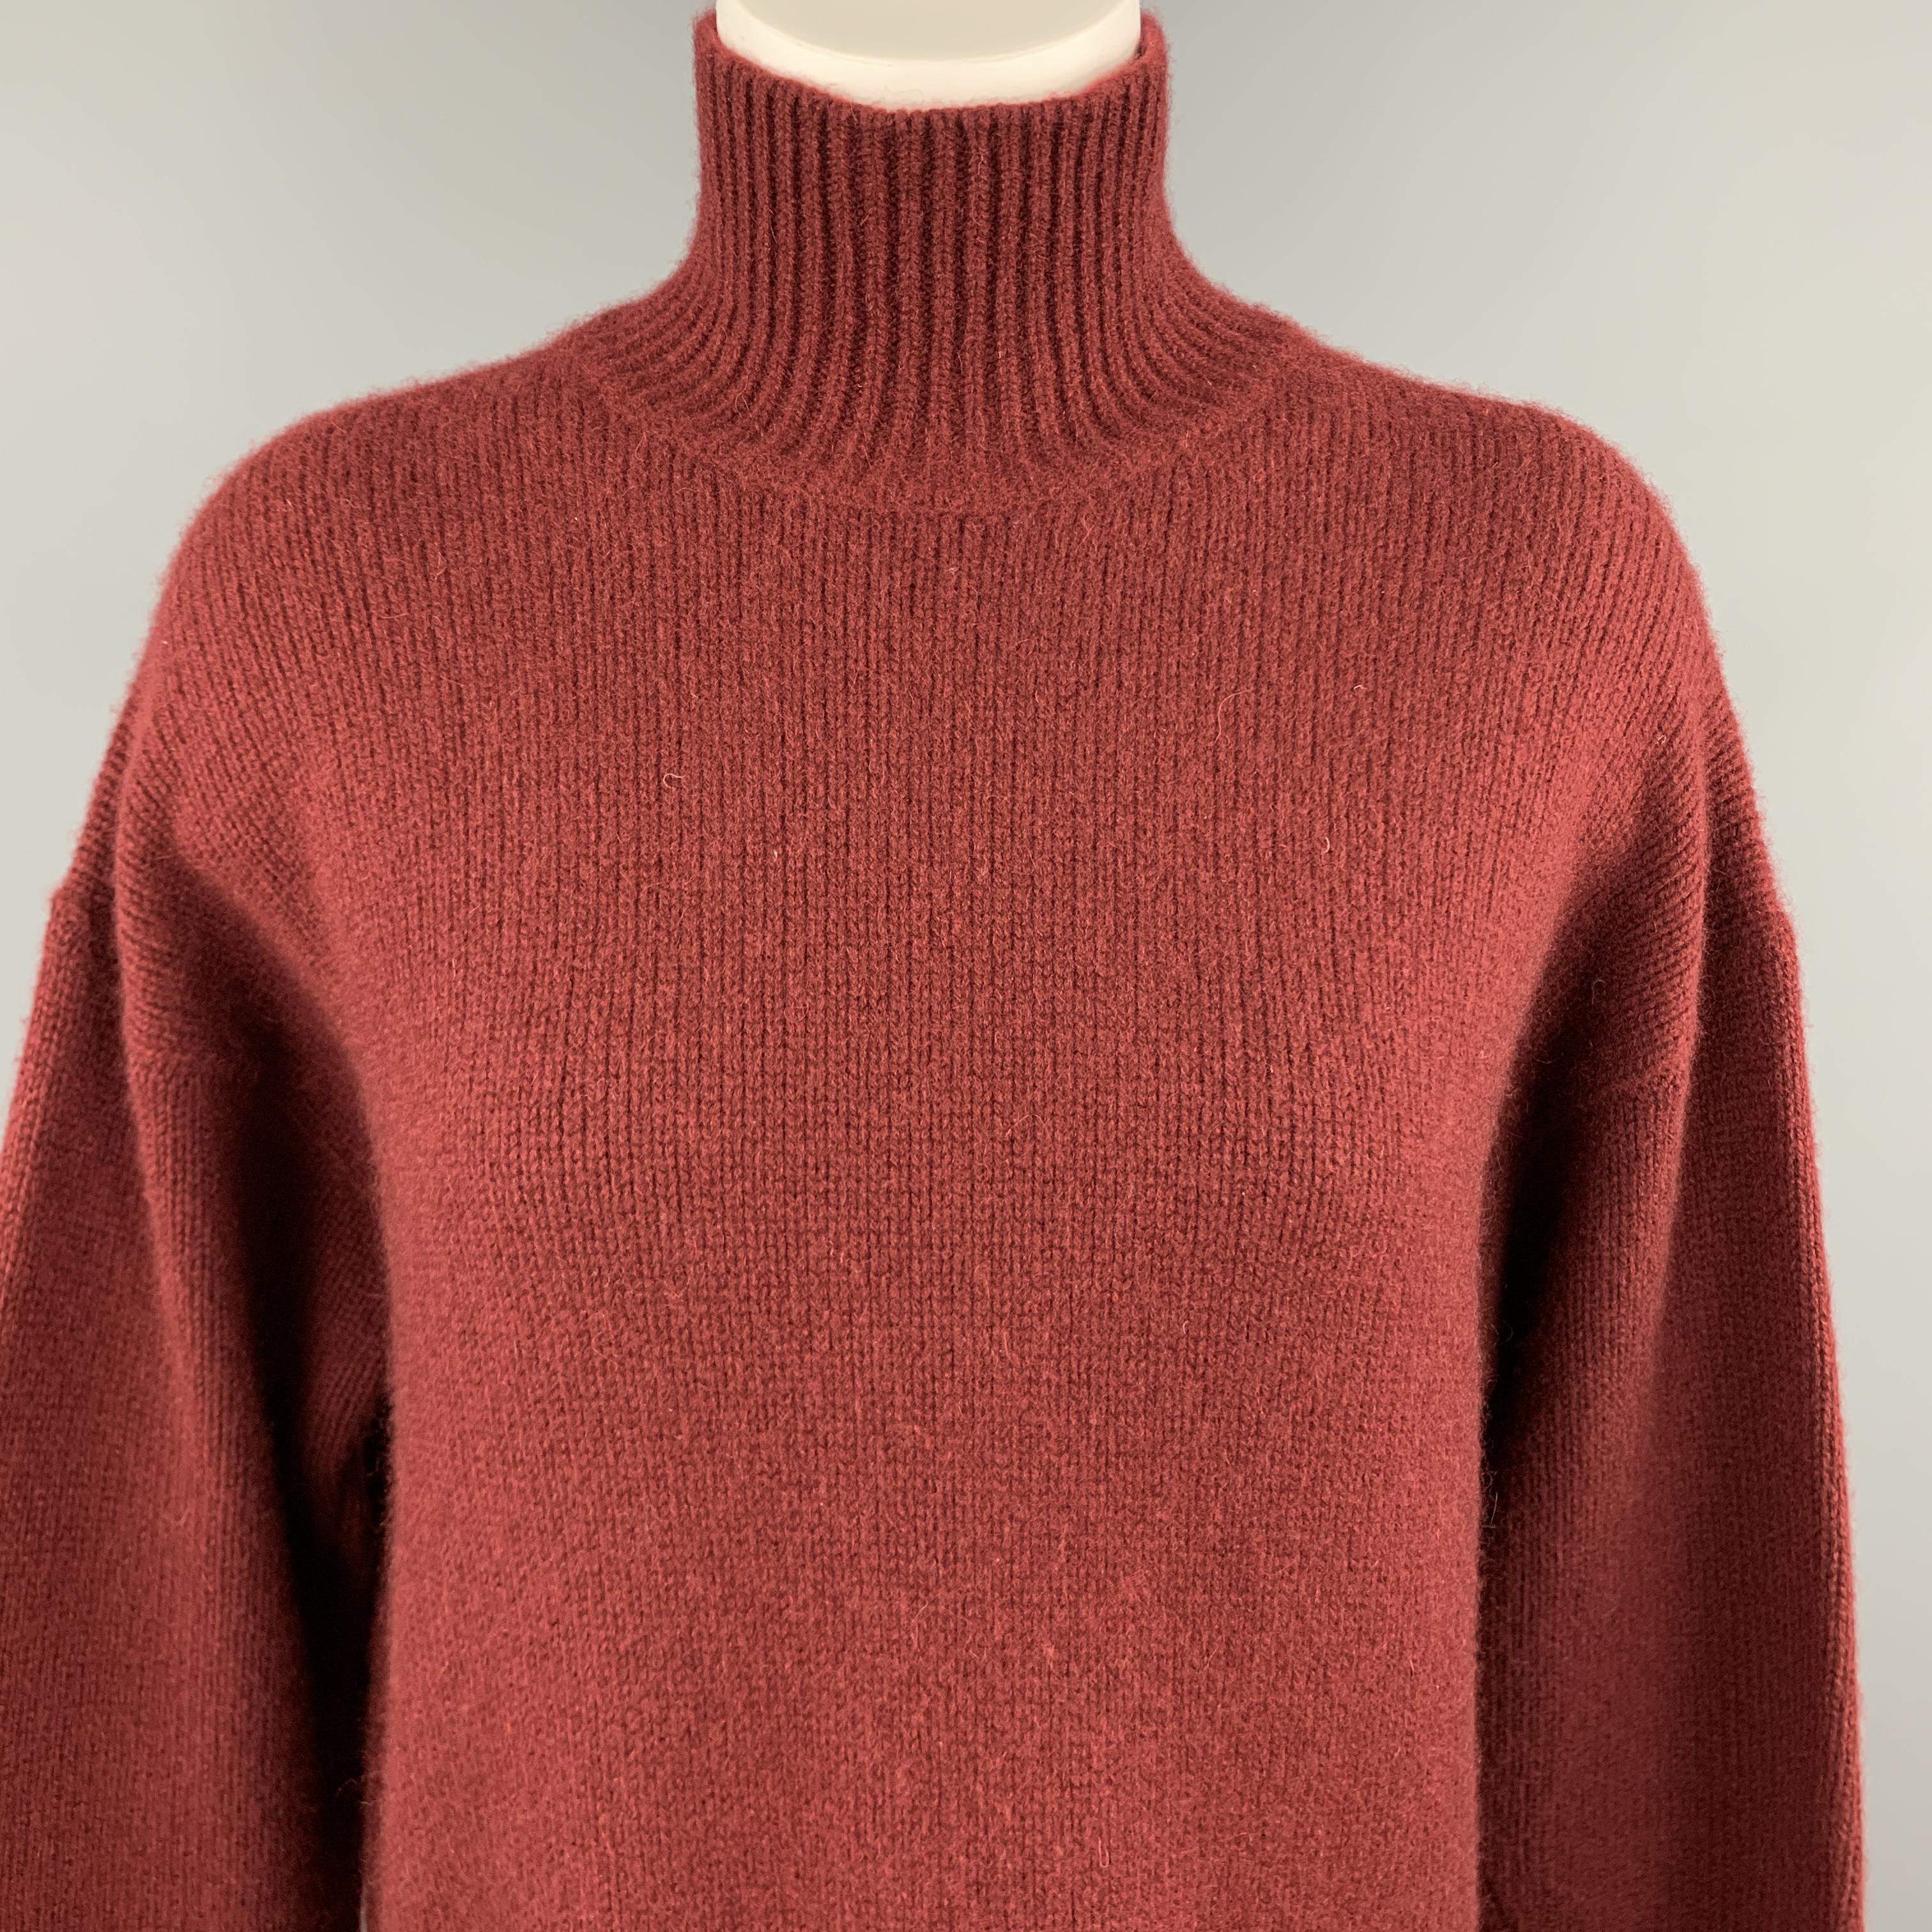 JOSEPH oversized turtleneck sweater comes in rich burgundy red cashmere knit with a ribbed high turtleneck, longline hem, and slit cuff sleeves. 

Excellent Pre-Owned Condition.
Marked: M

Measurements:

Shoulder: 22 in.
Bust: 46 in.
Sleeve: 24